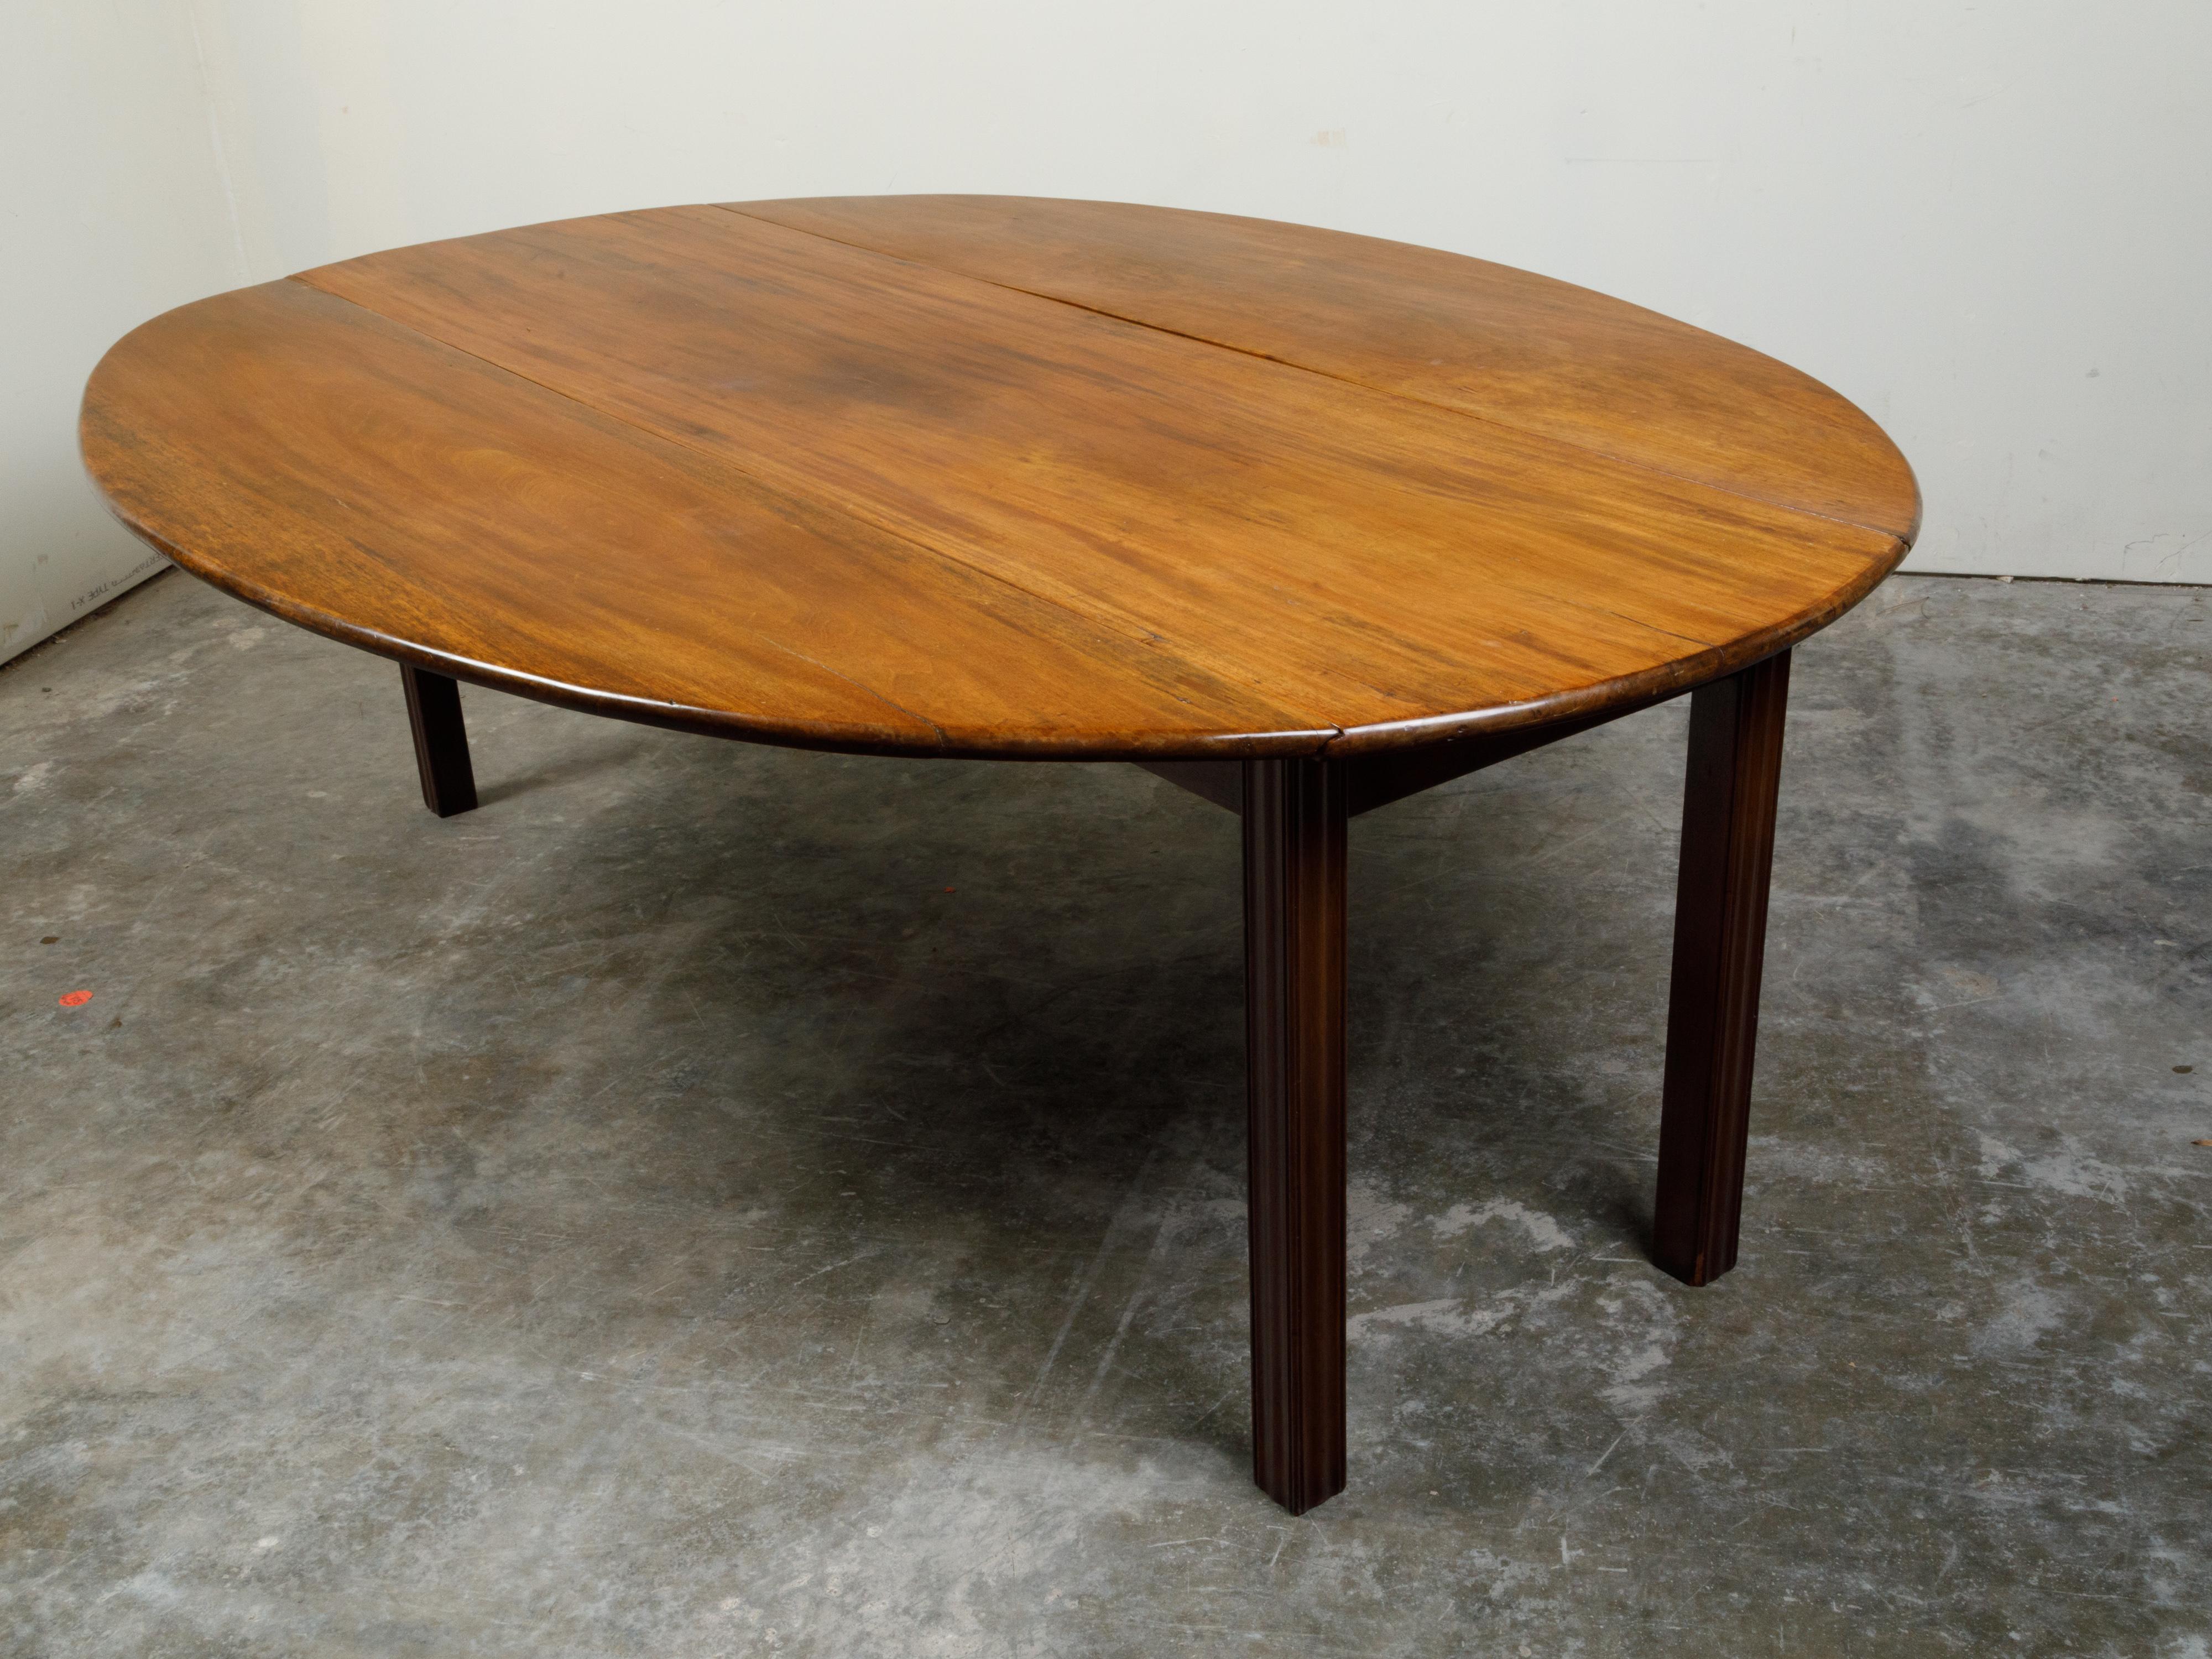 19th Century English Walnut Drop-Leaf Table with Oval Top and Straight Legs For Sale 4